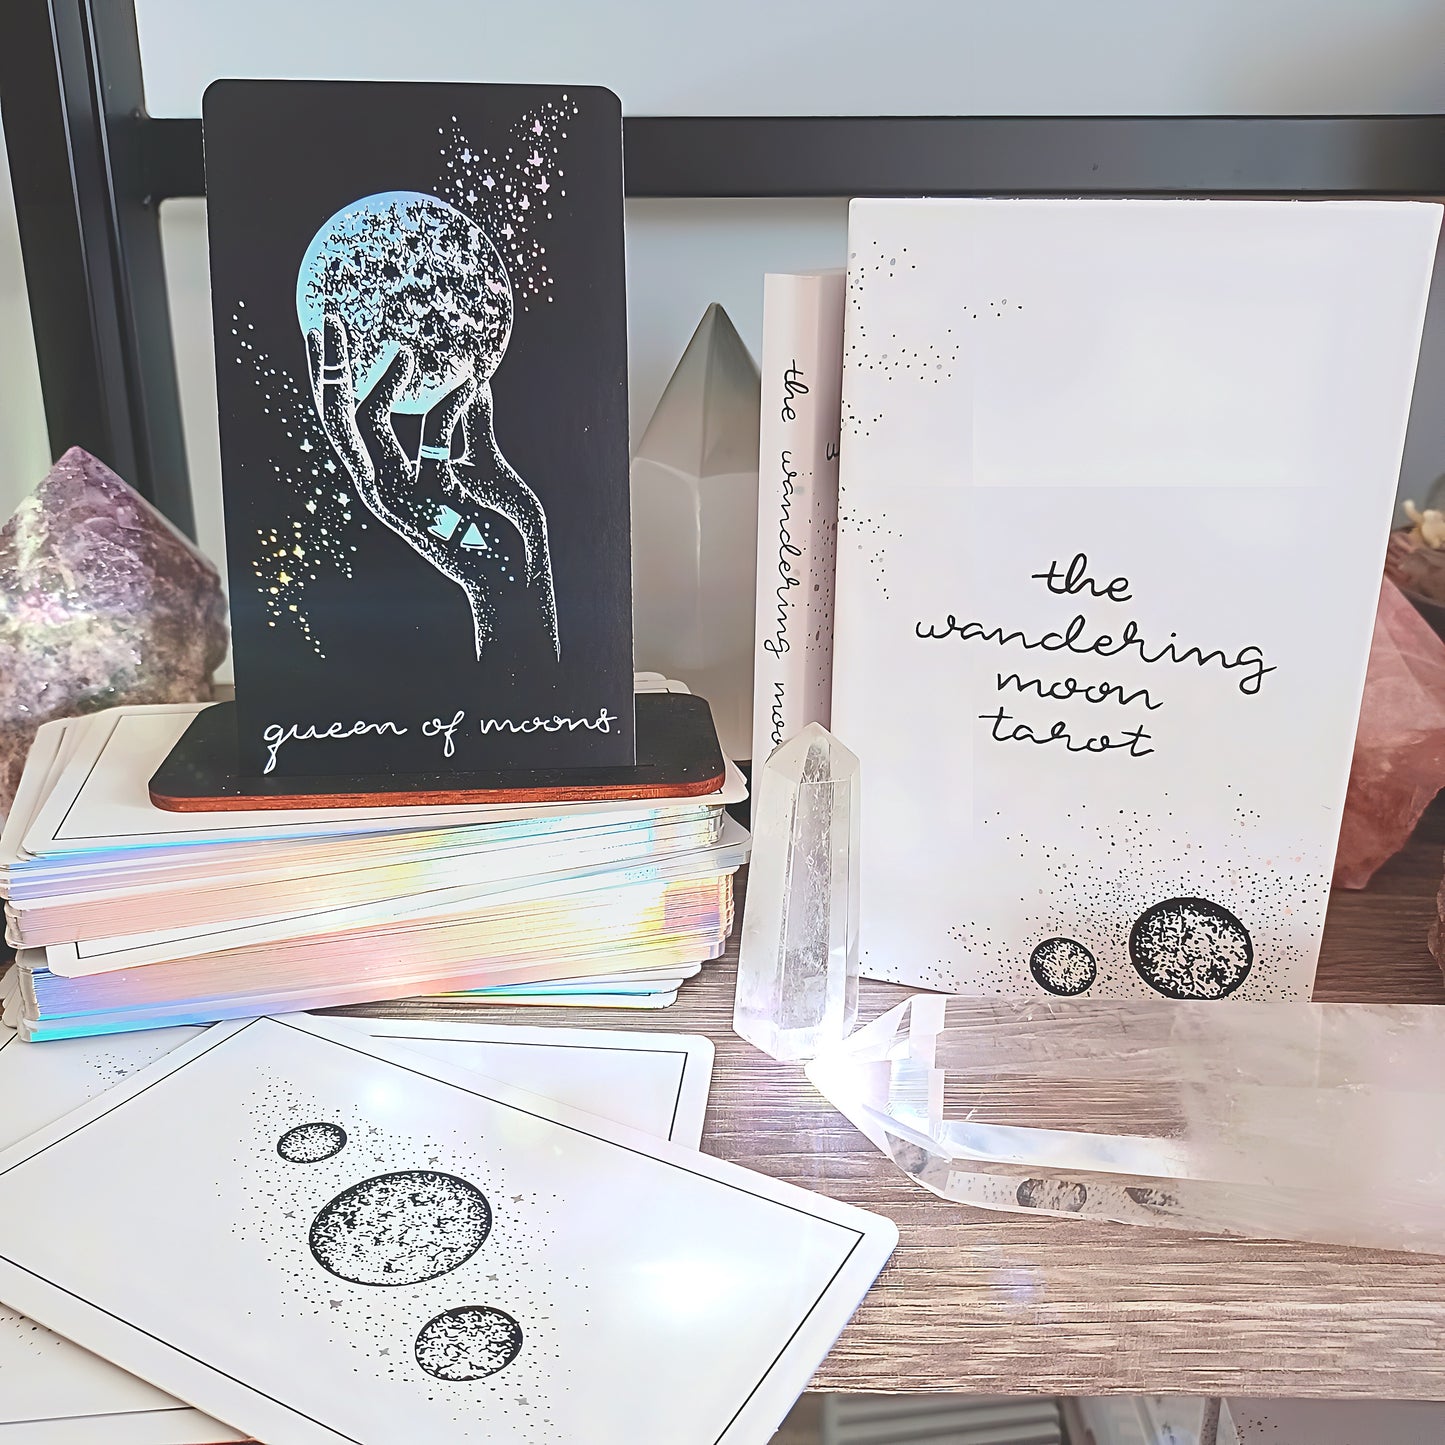 indie tarot card decks & oracle deck bundle gift set: three deck set with guidebooks | holographic details | luxe white & black tarot cards, minimalist oracle cards